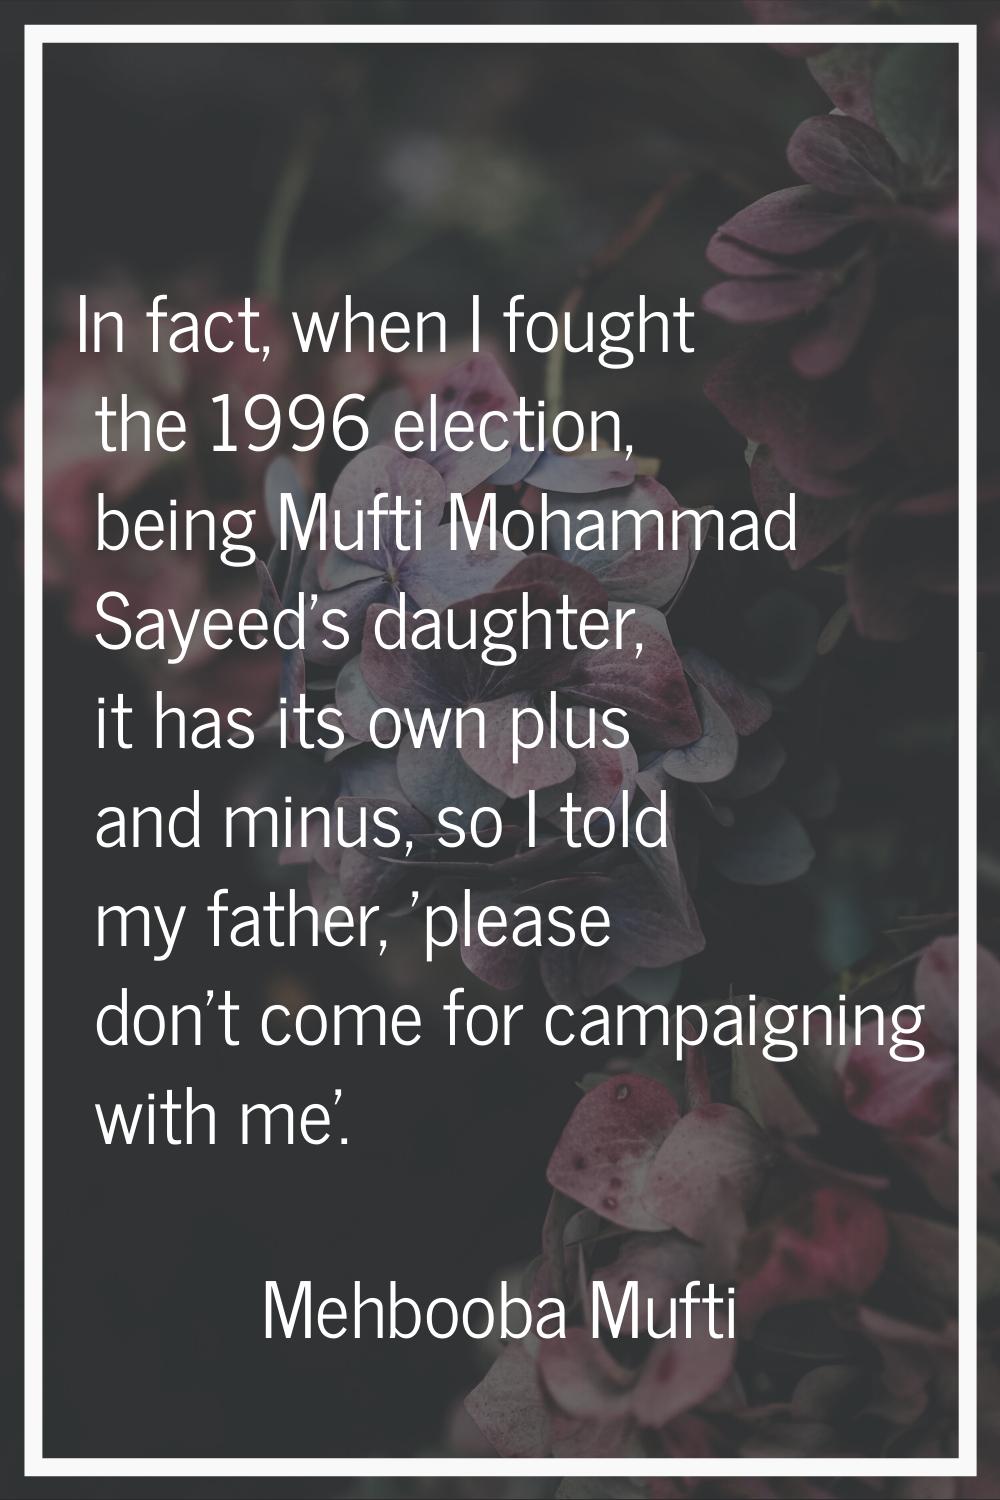 In fact, when I fought the 1996 election, being Mufti Mohammad Sayeed's daughter, it has its own pl